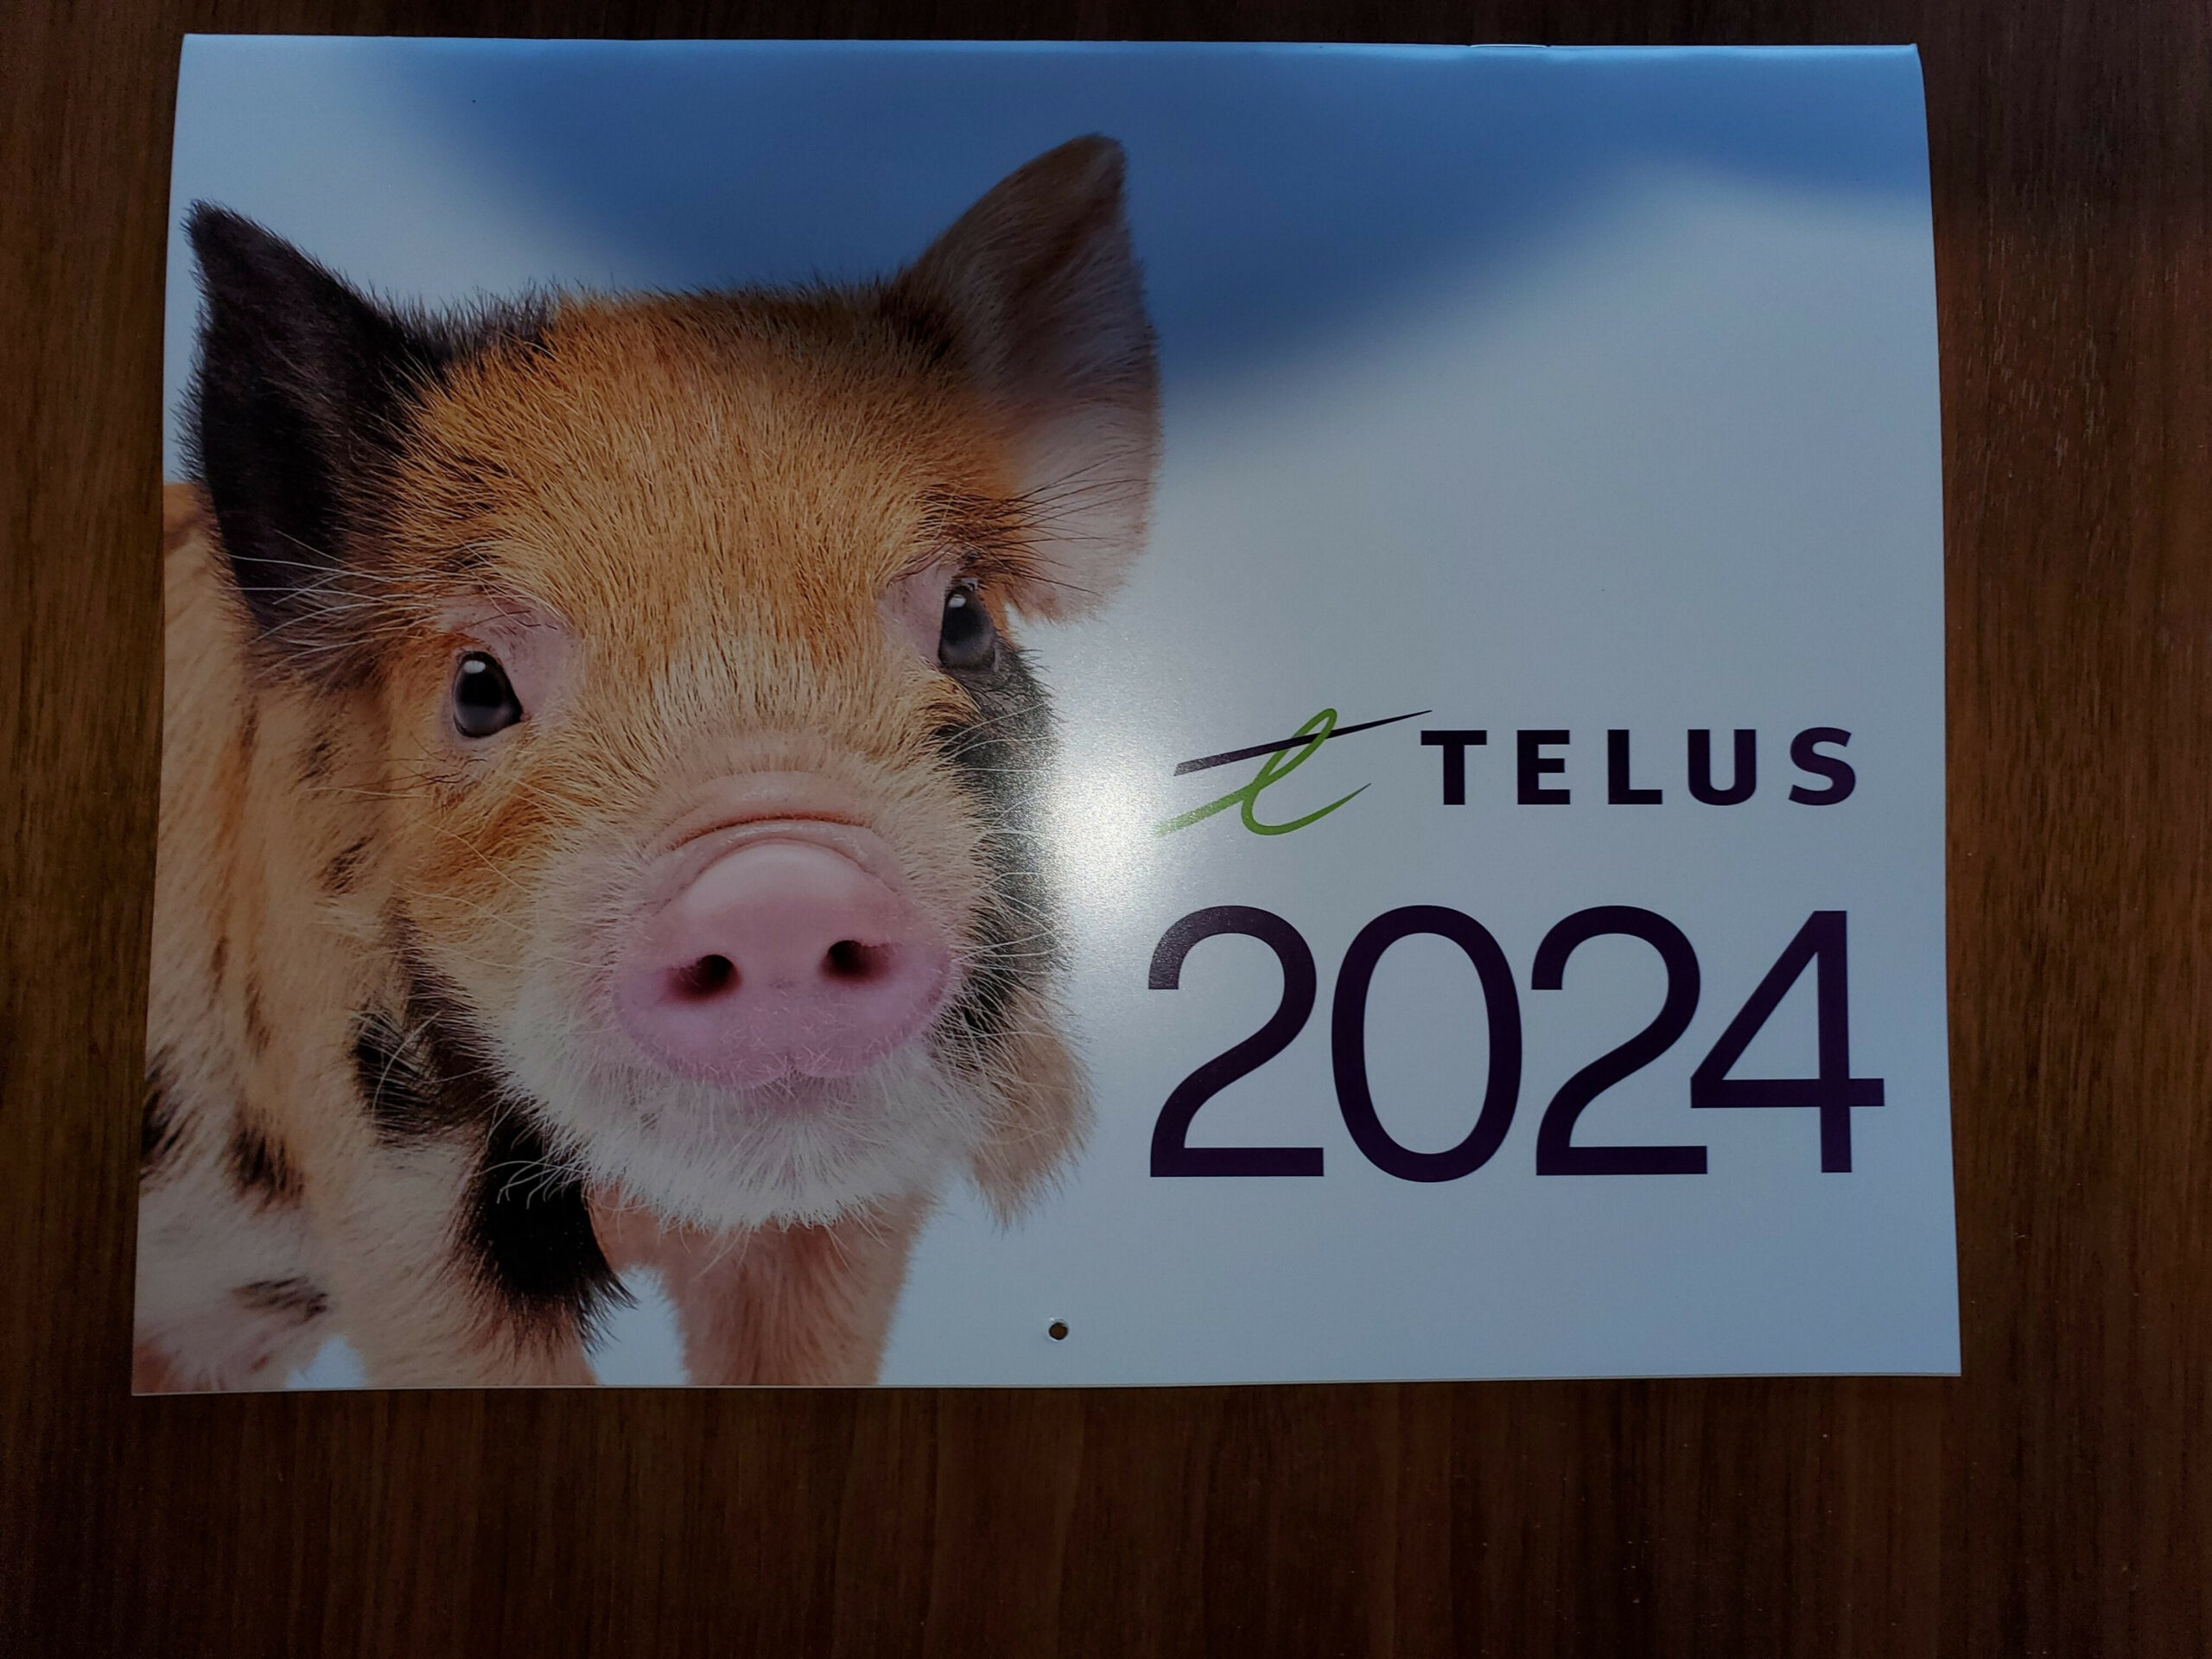 Telus]  Calendars are free for Telus Customers and limited to